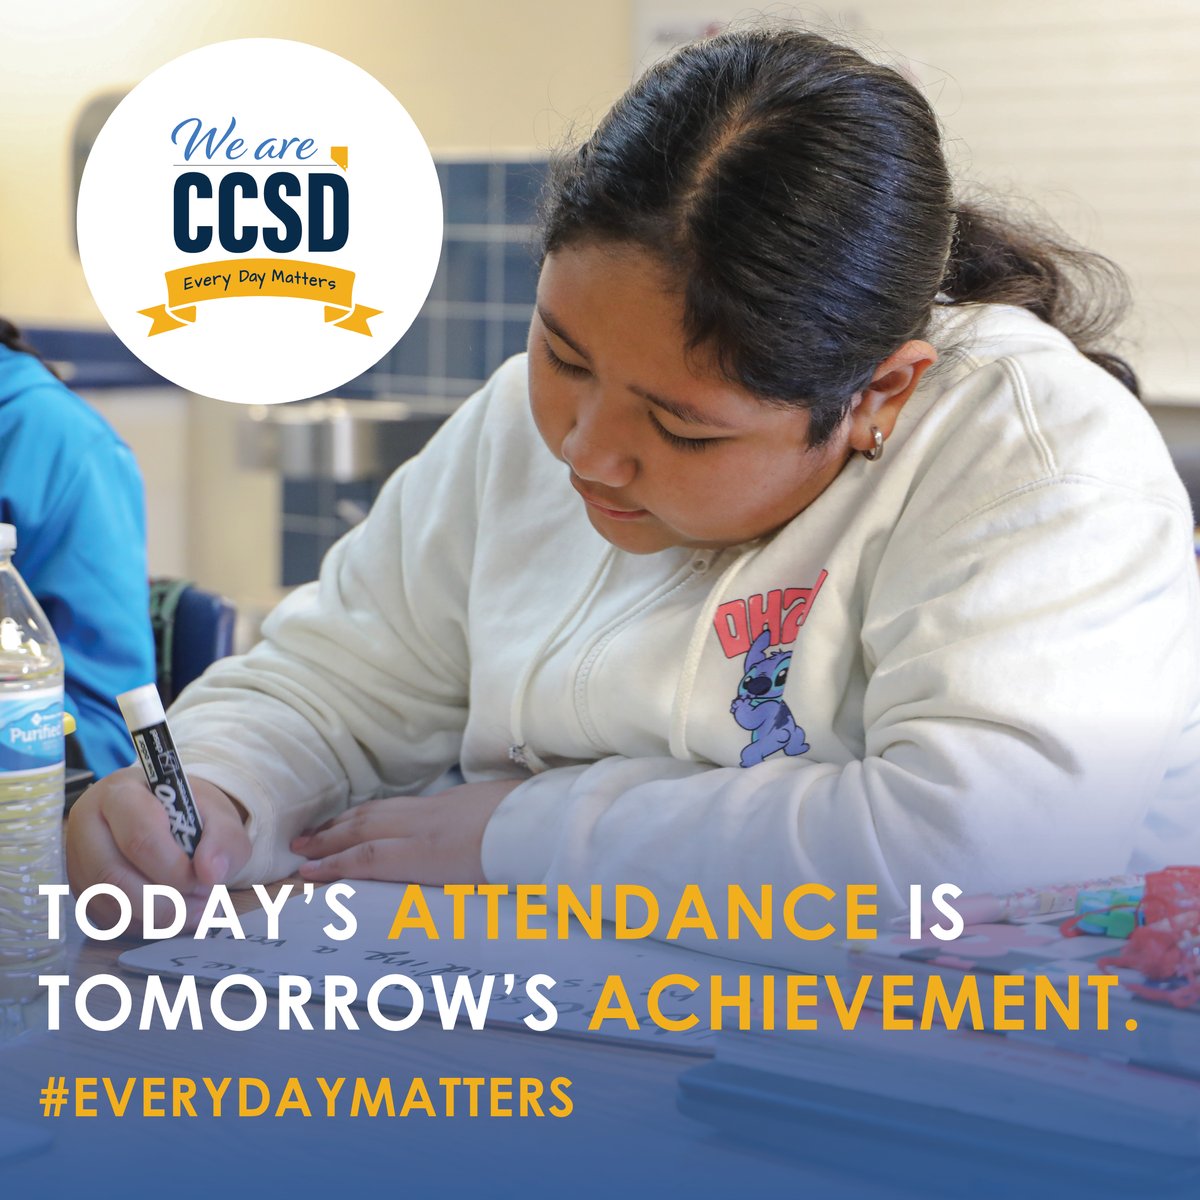 🌞 Each sunrise brings a chance to shine in class. Embrace the power of attendance for lifelong learning. 📚✨ #EveryDayMatters #AllinforKids
@ClarkCountySch